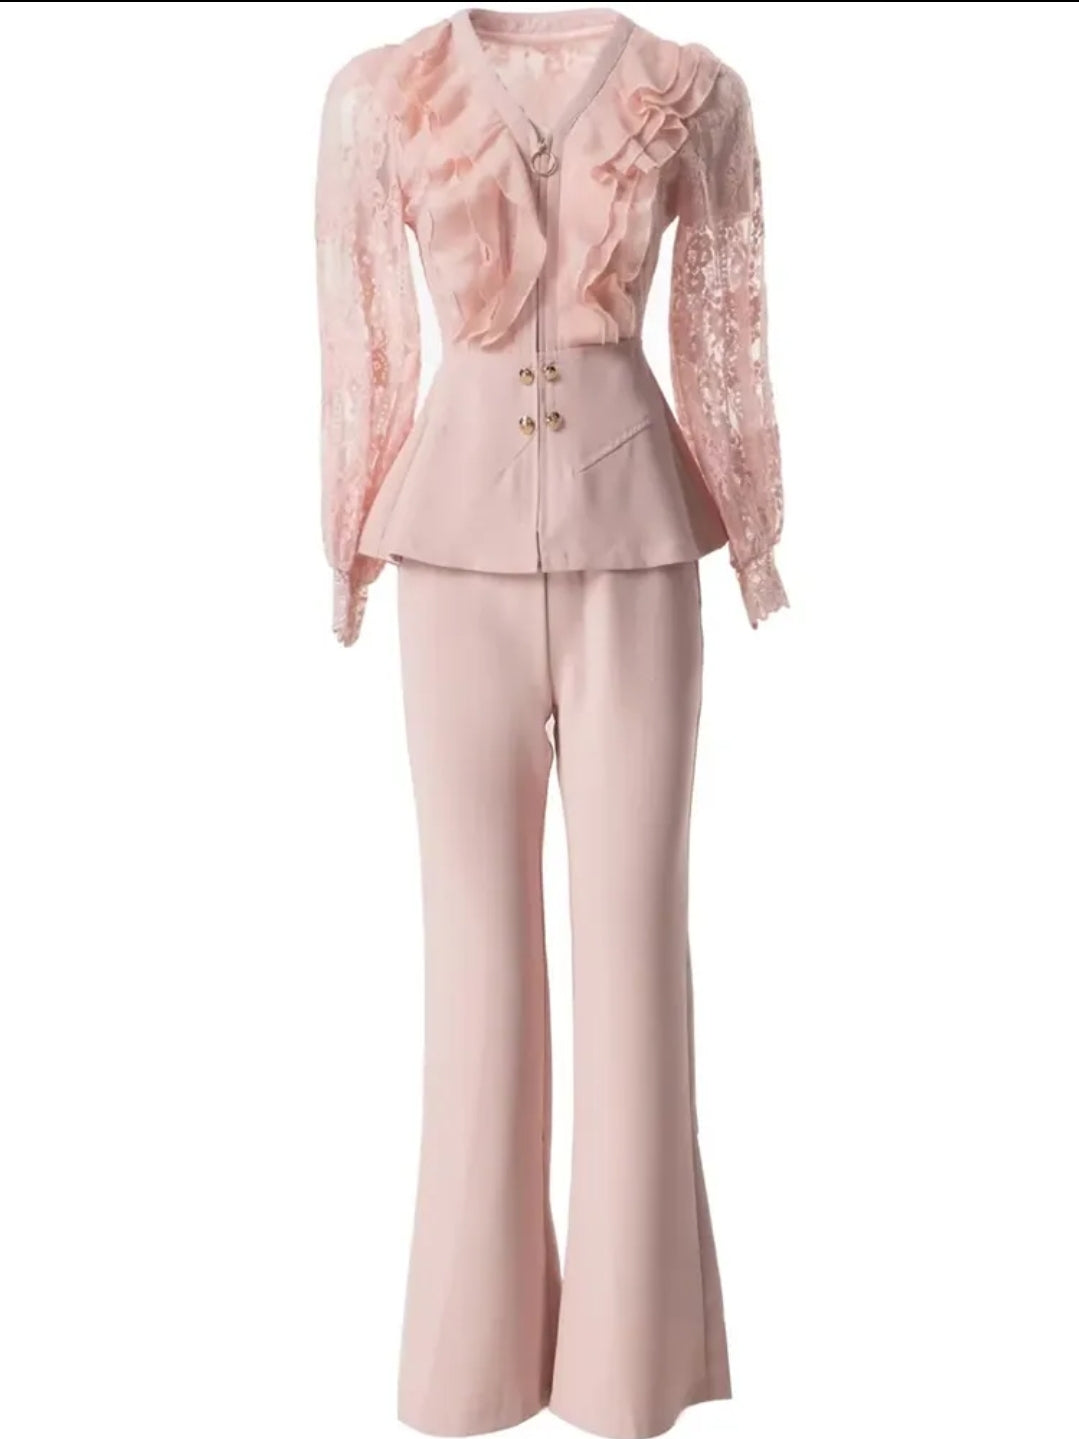 Pink Lace Jacket end Flare Pant